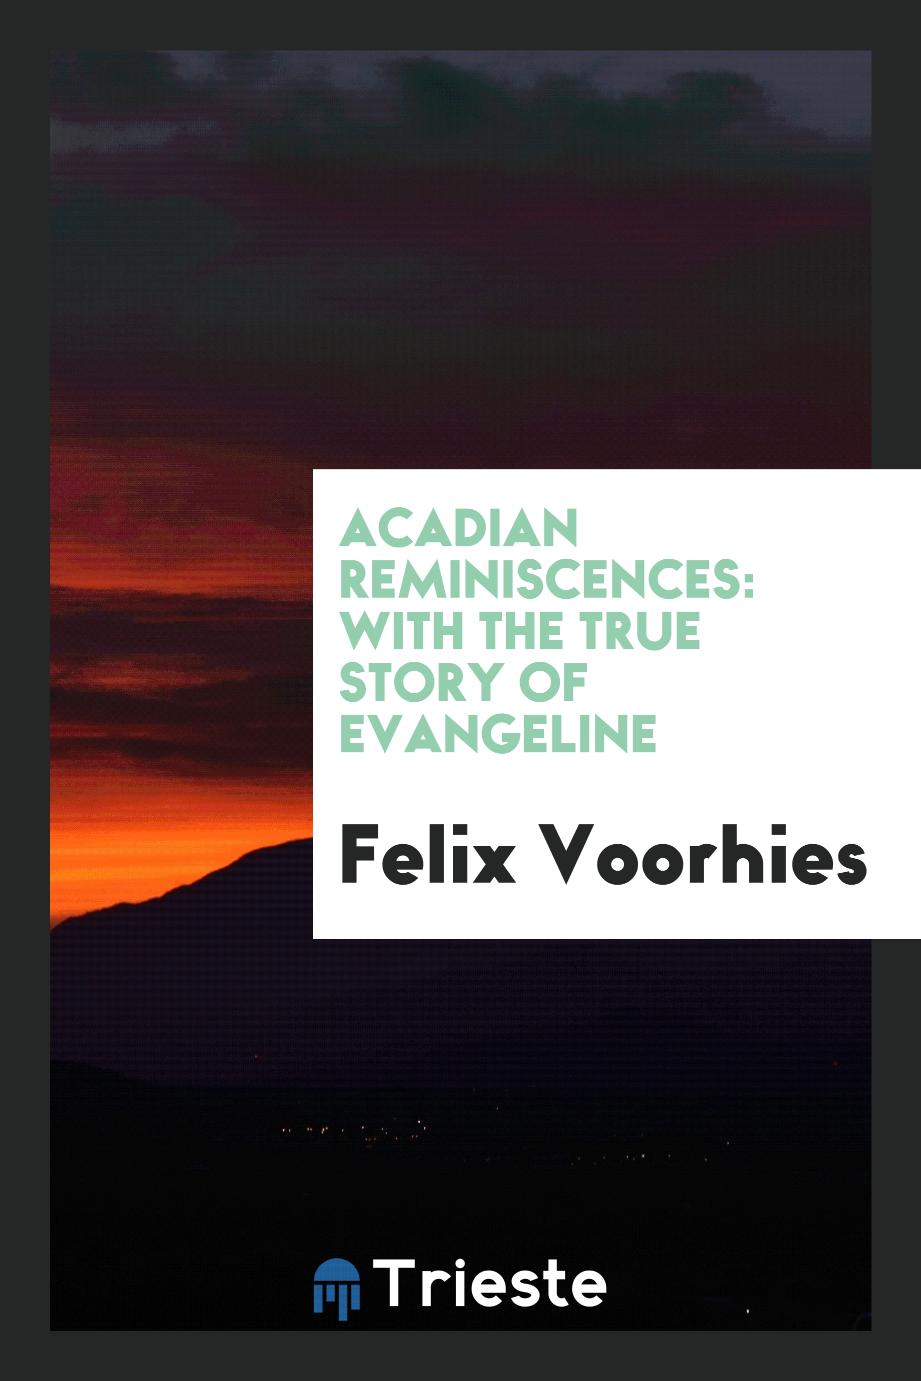 Acadian Reminiscences: With the True Story of Evangeline